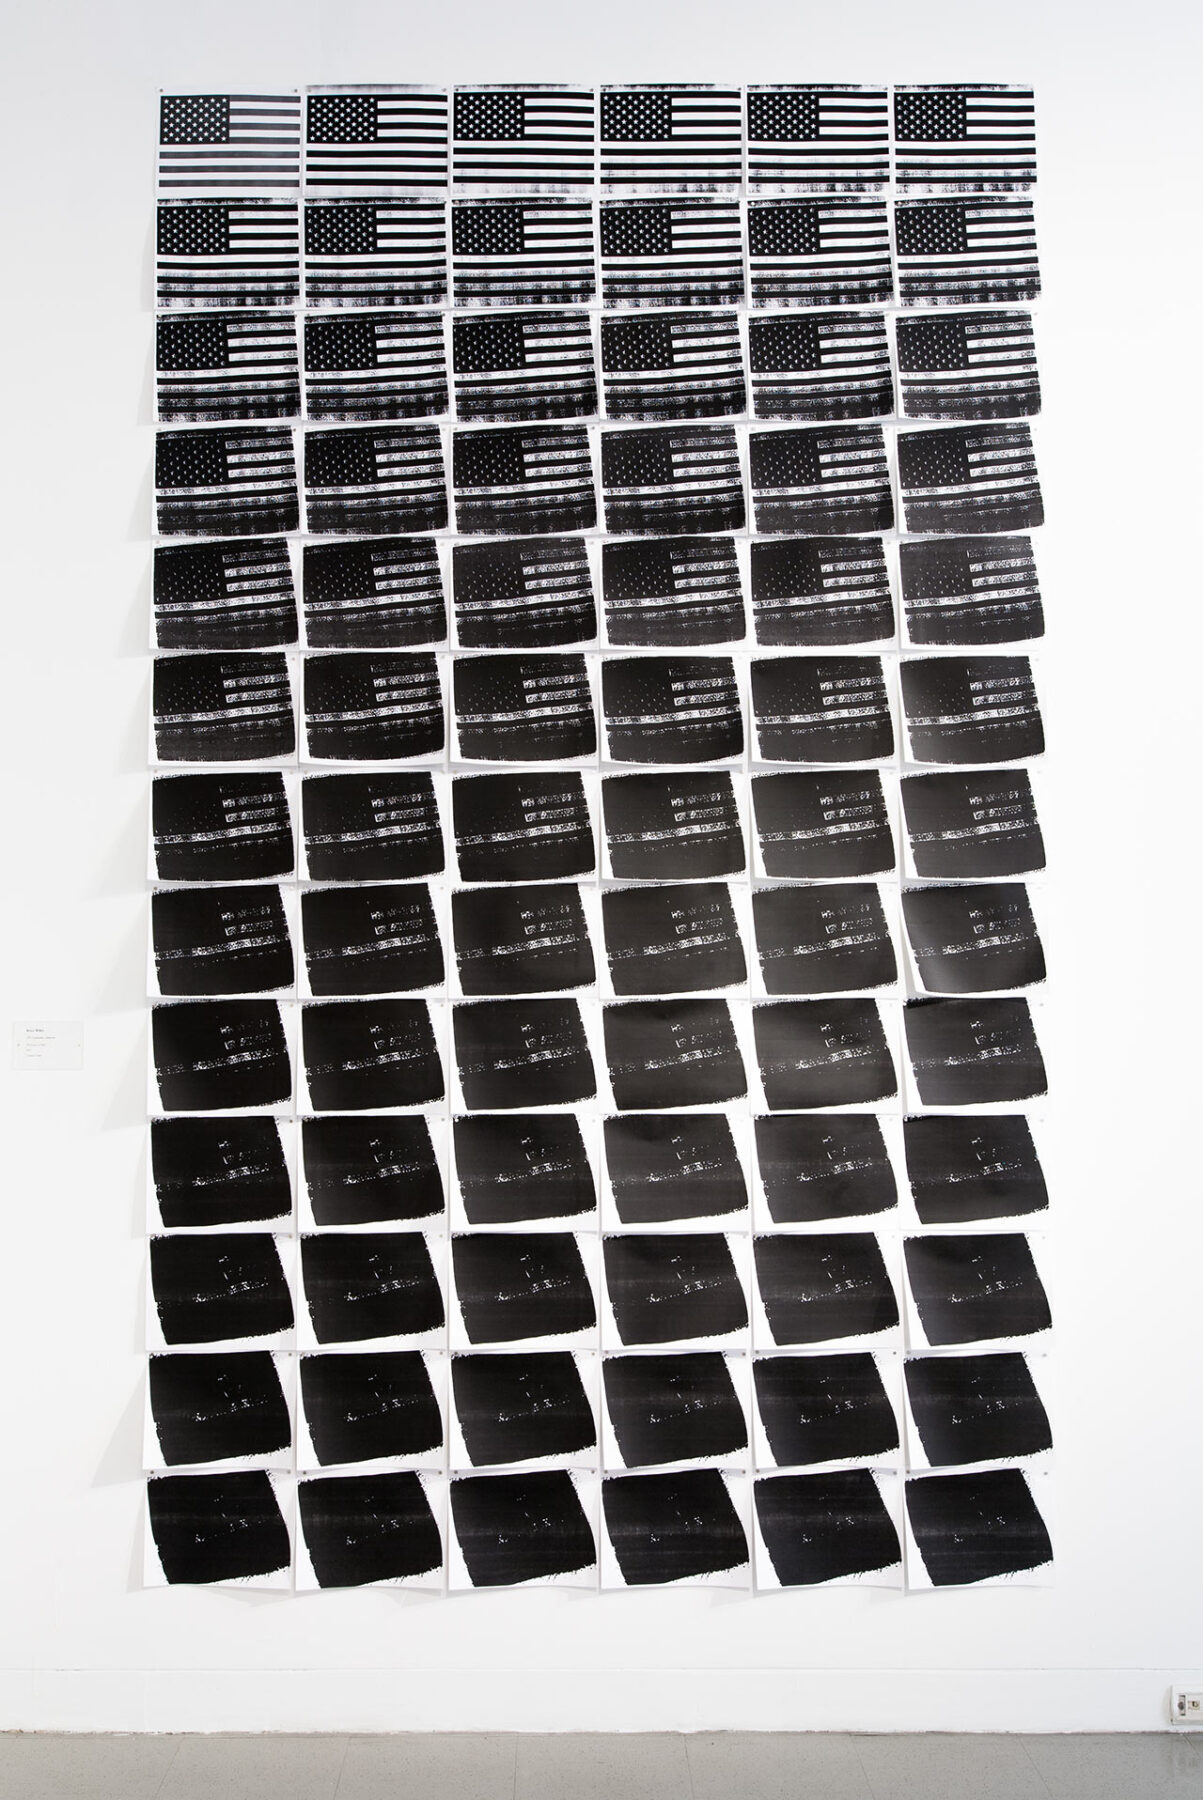 78th Generation American, 2007. 78 progressively degraded photocopies of an American flag